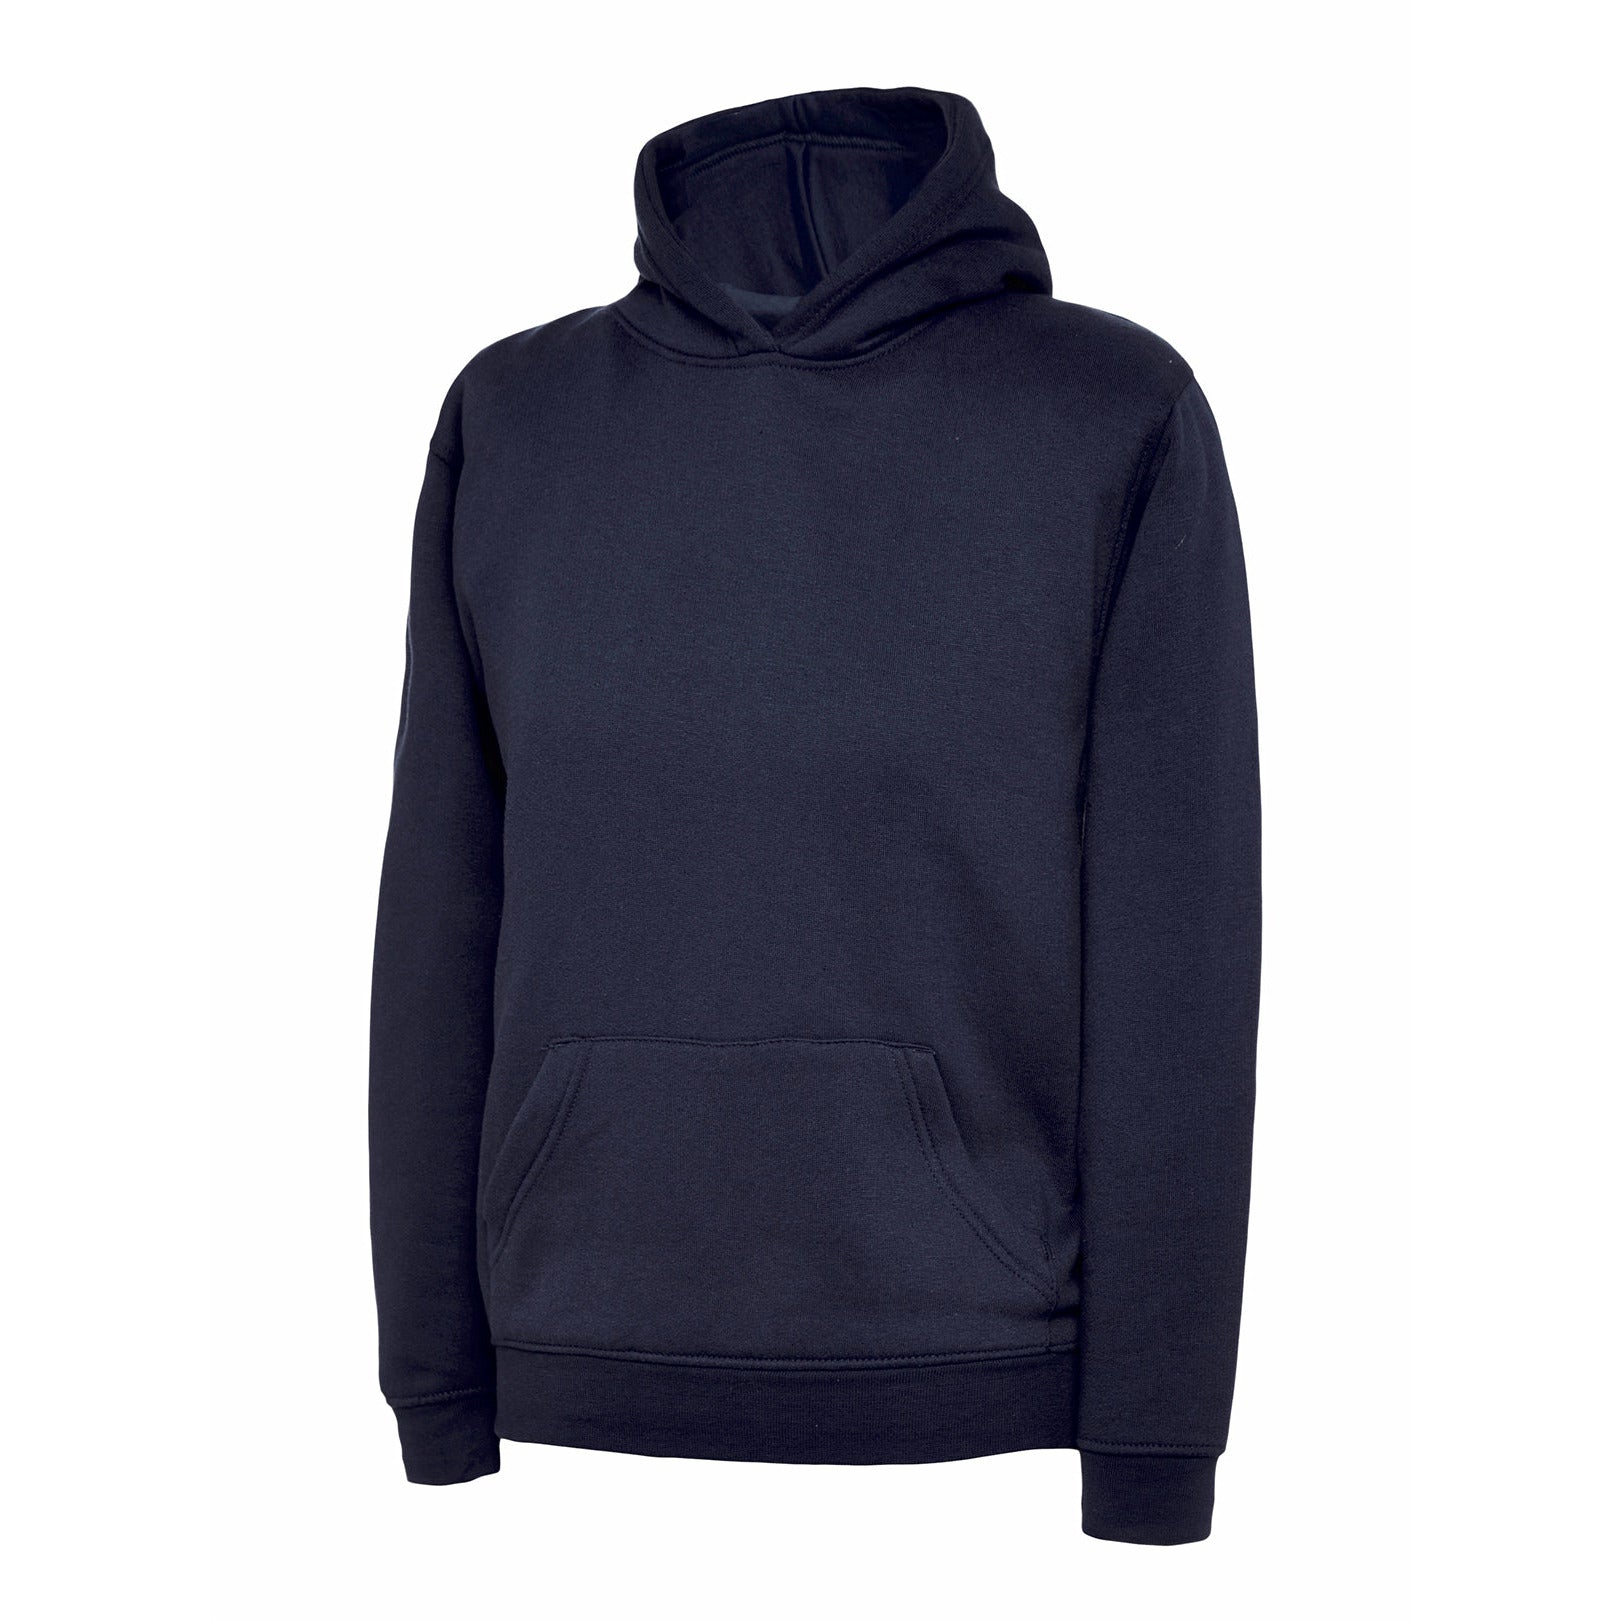 Navy Hoodie - Age 3 - 13 - Royal School for the Deaf Derby